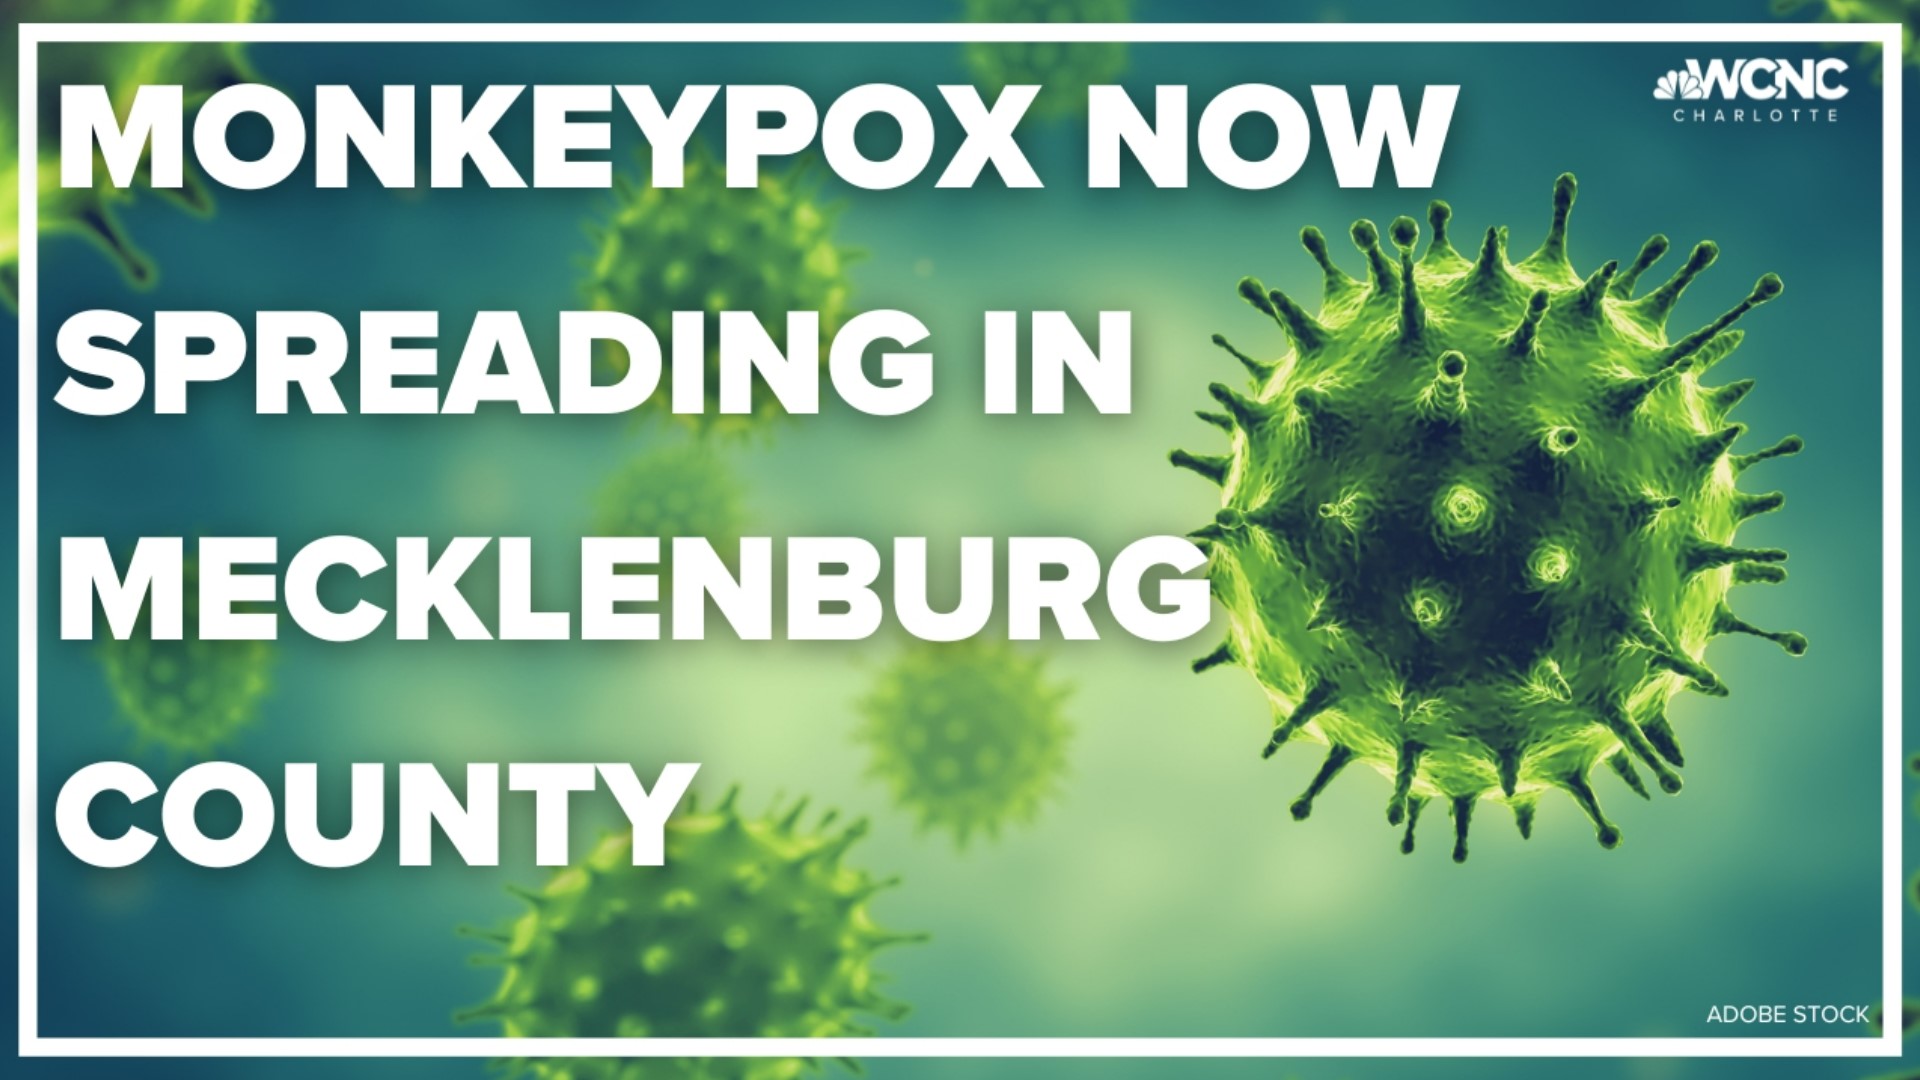 Health officials said there is now evidence of local transmission of monkeypox in Mecklenburg County, as cases continue to grow in the Charlotte area.